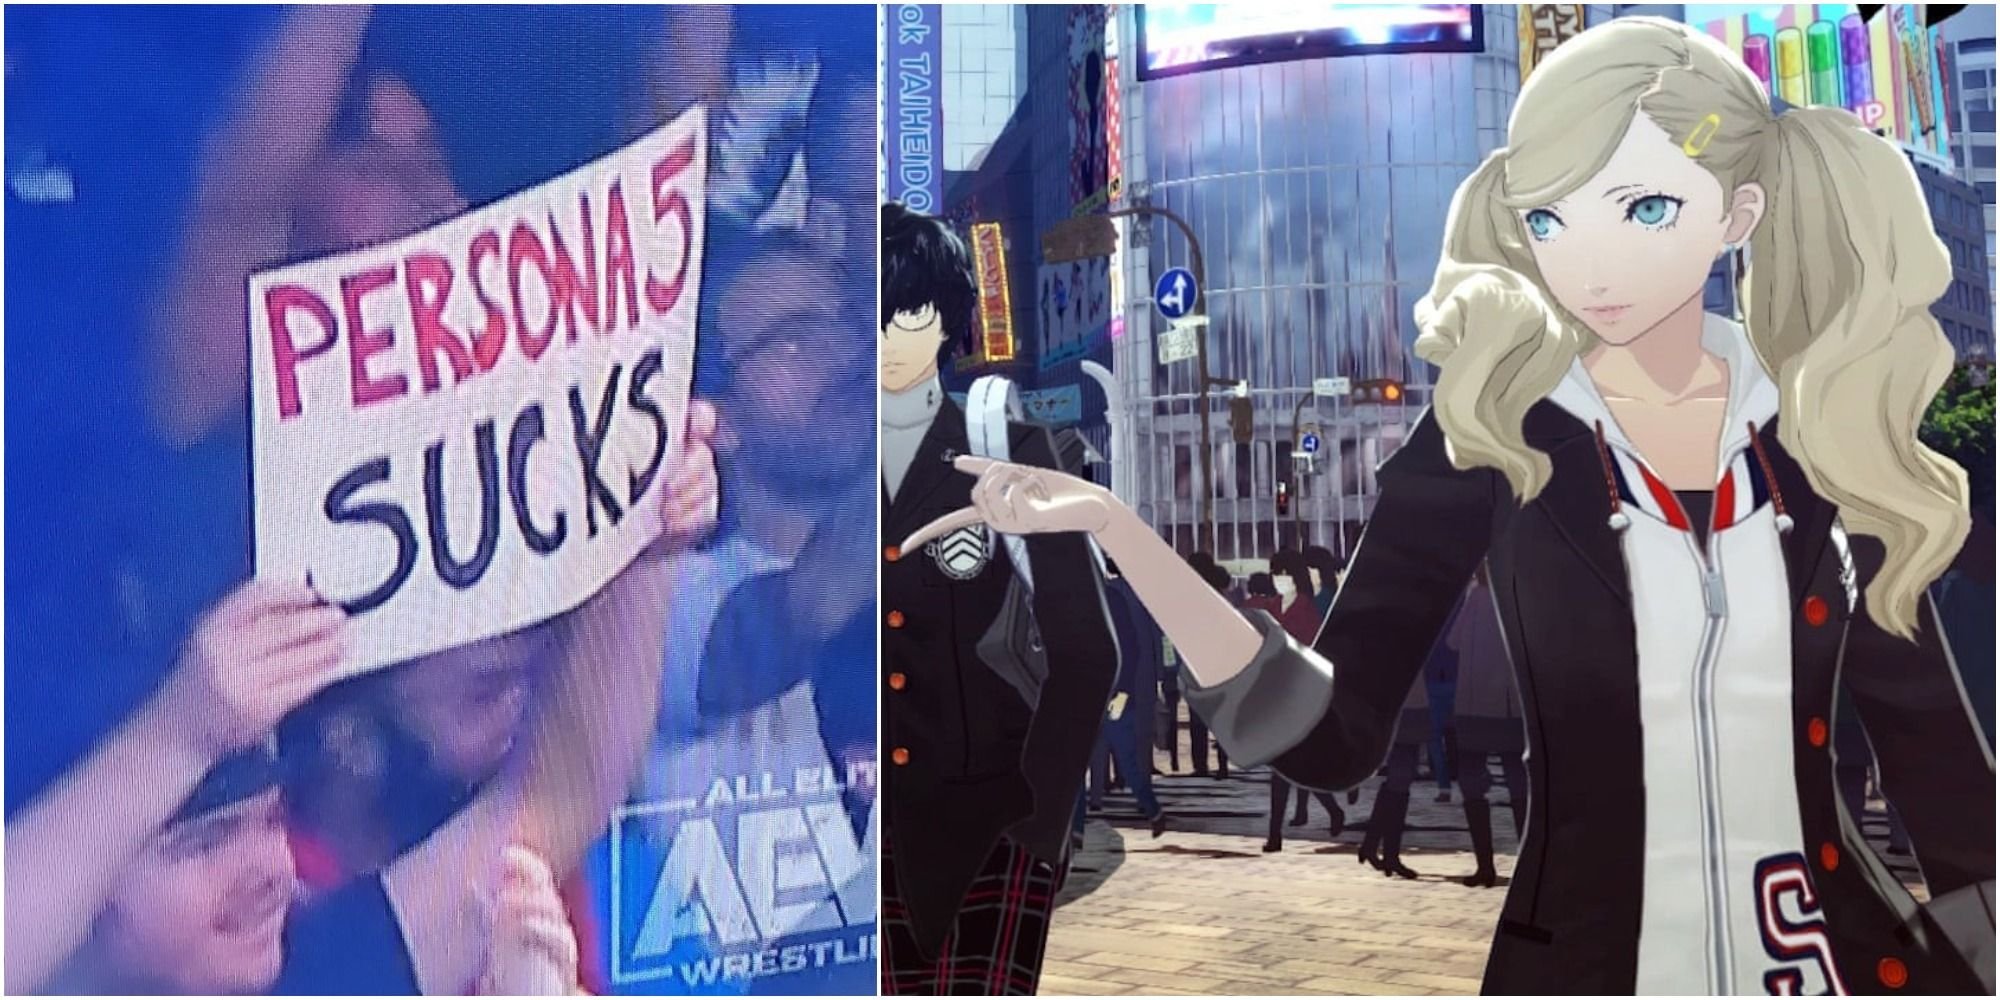 Wrestling Fans Are Using Signs To Profess Their Live For RPGs